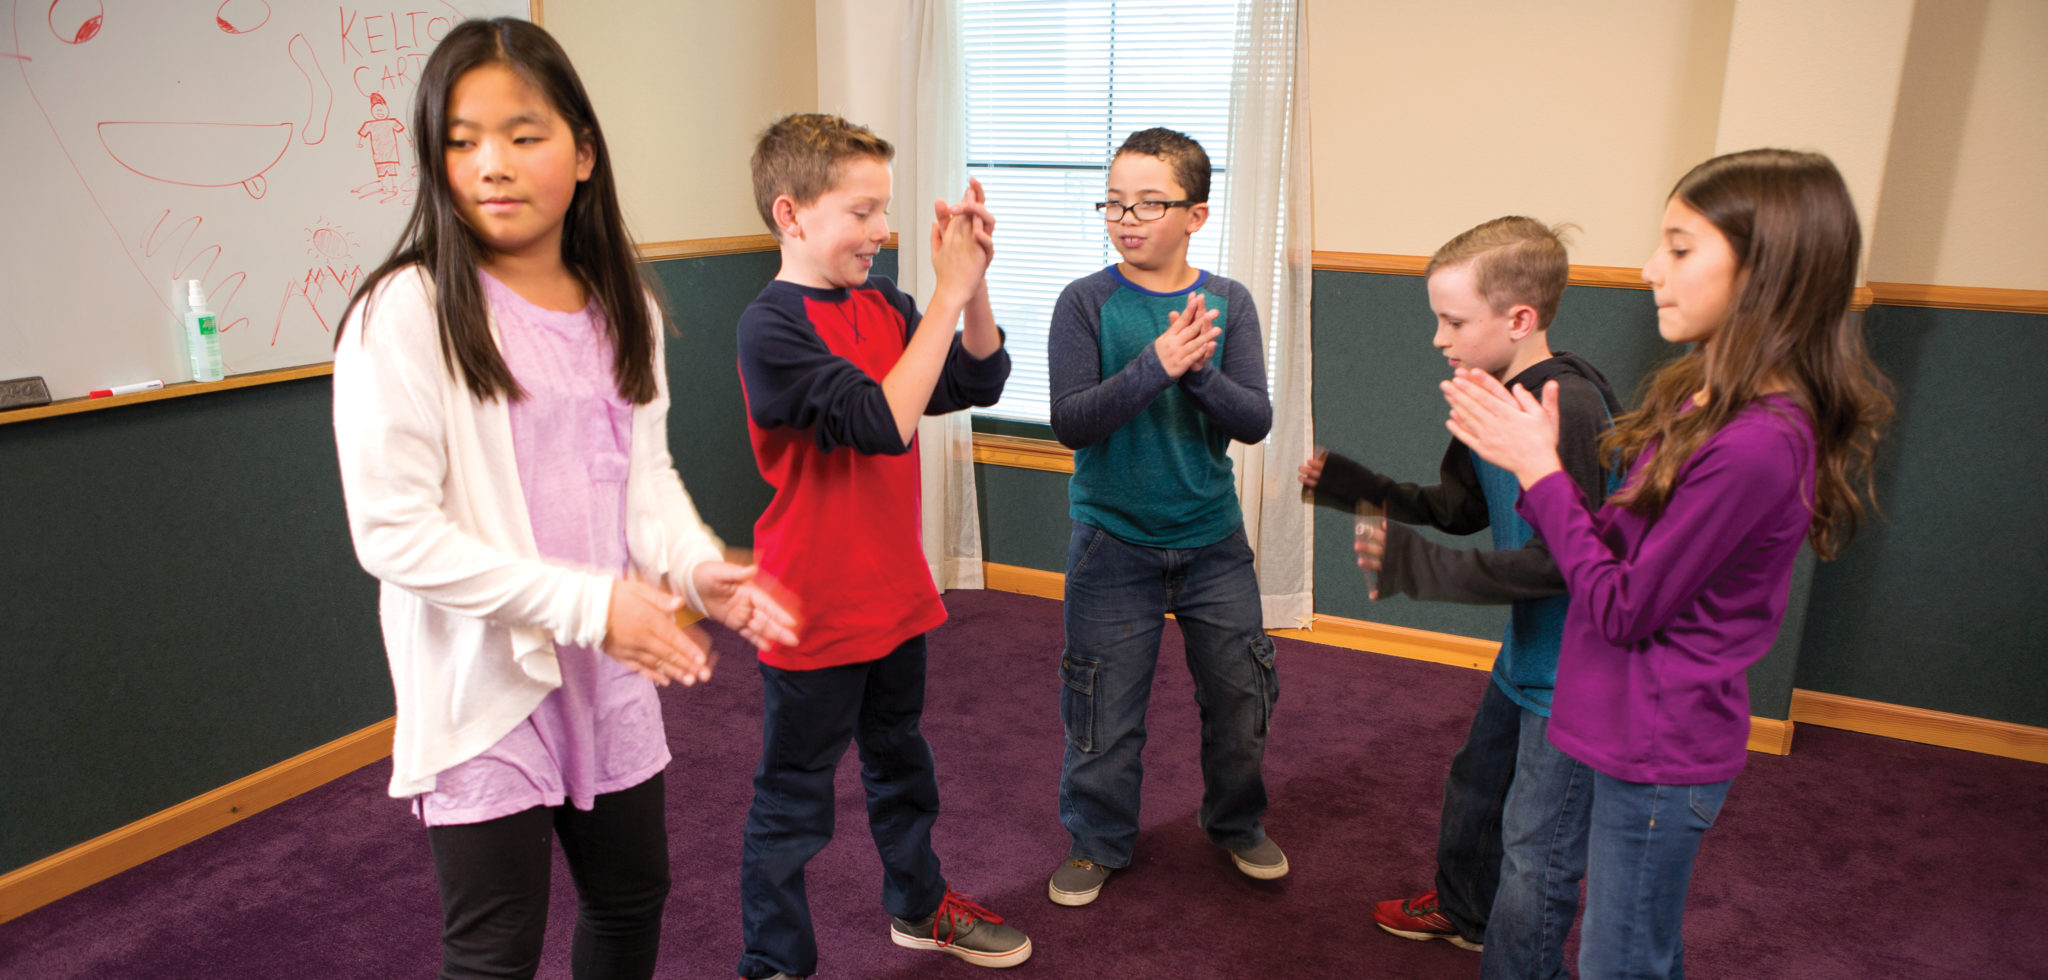 Children standing in a semi circle clapping.